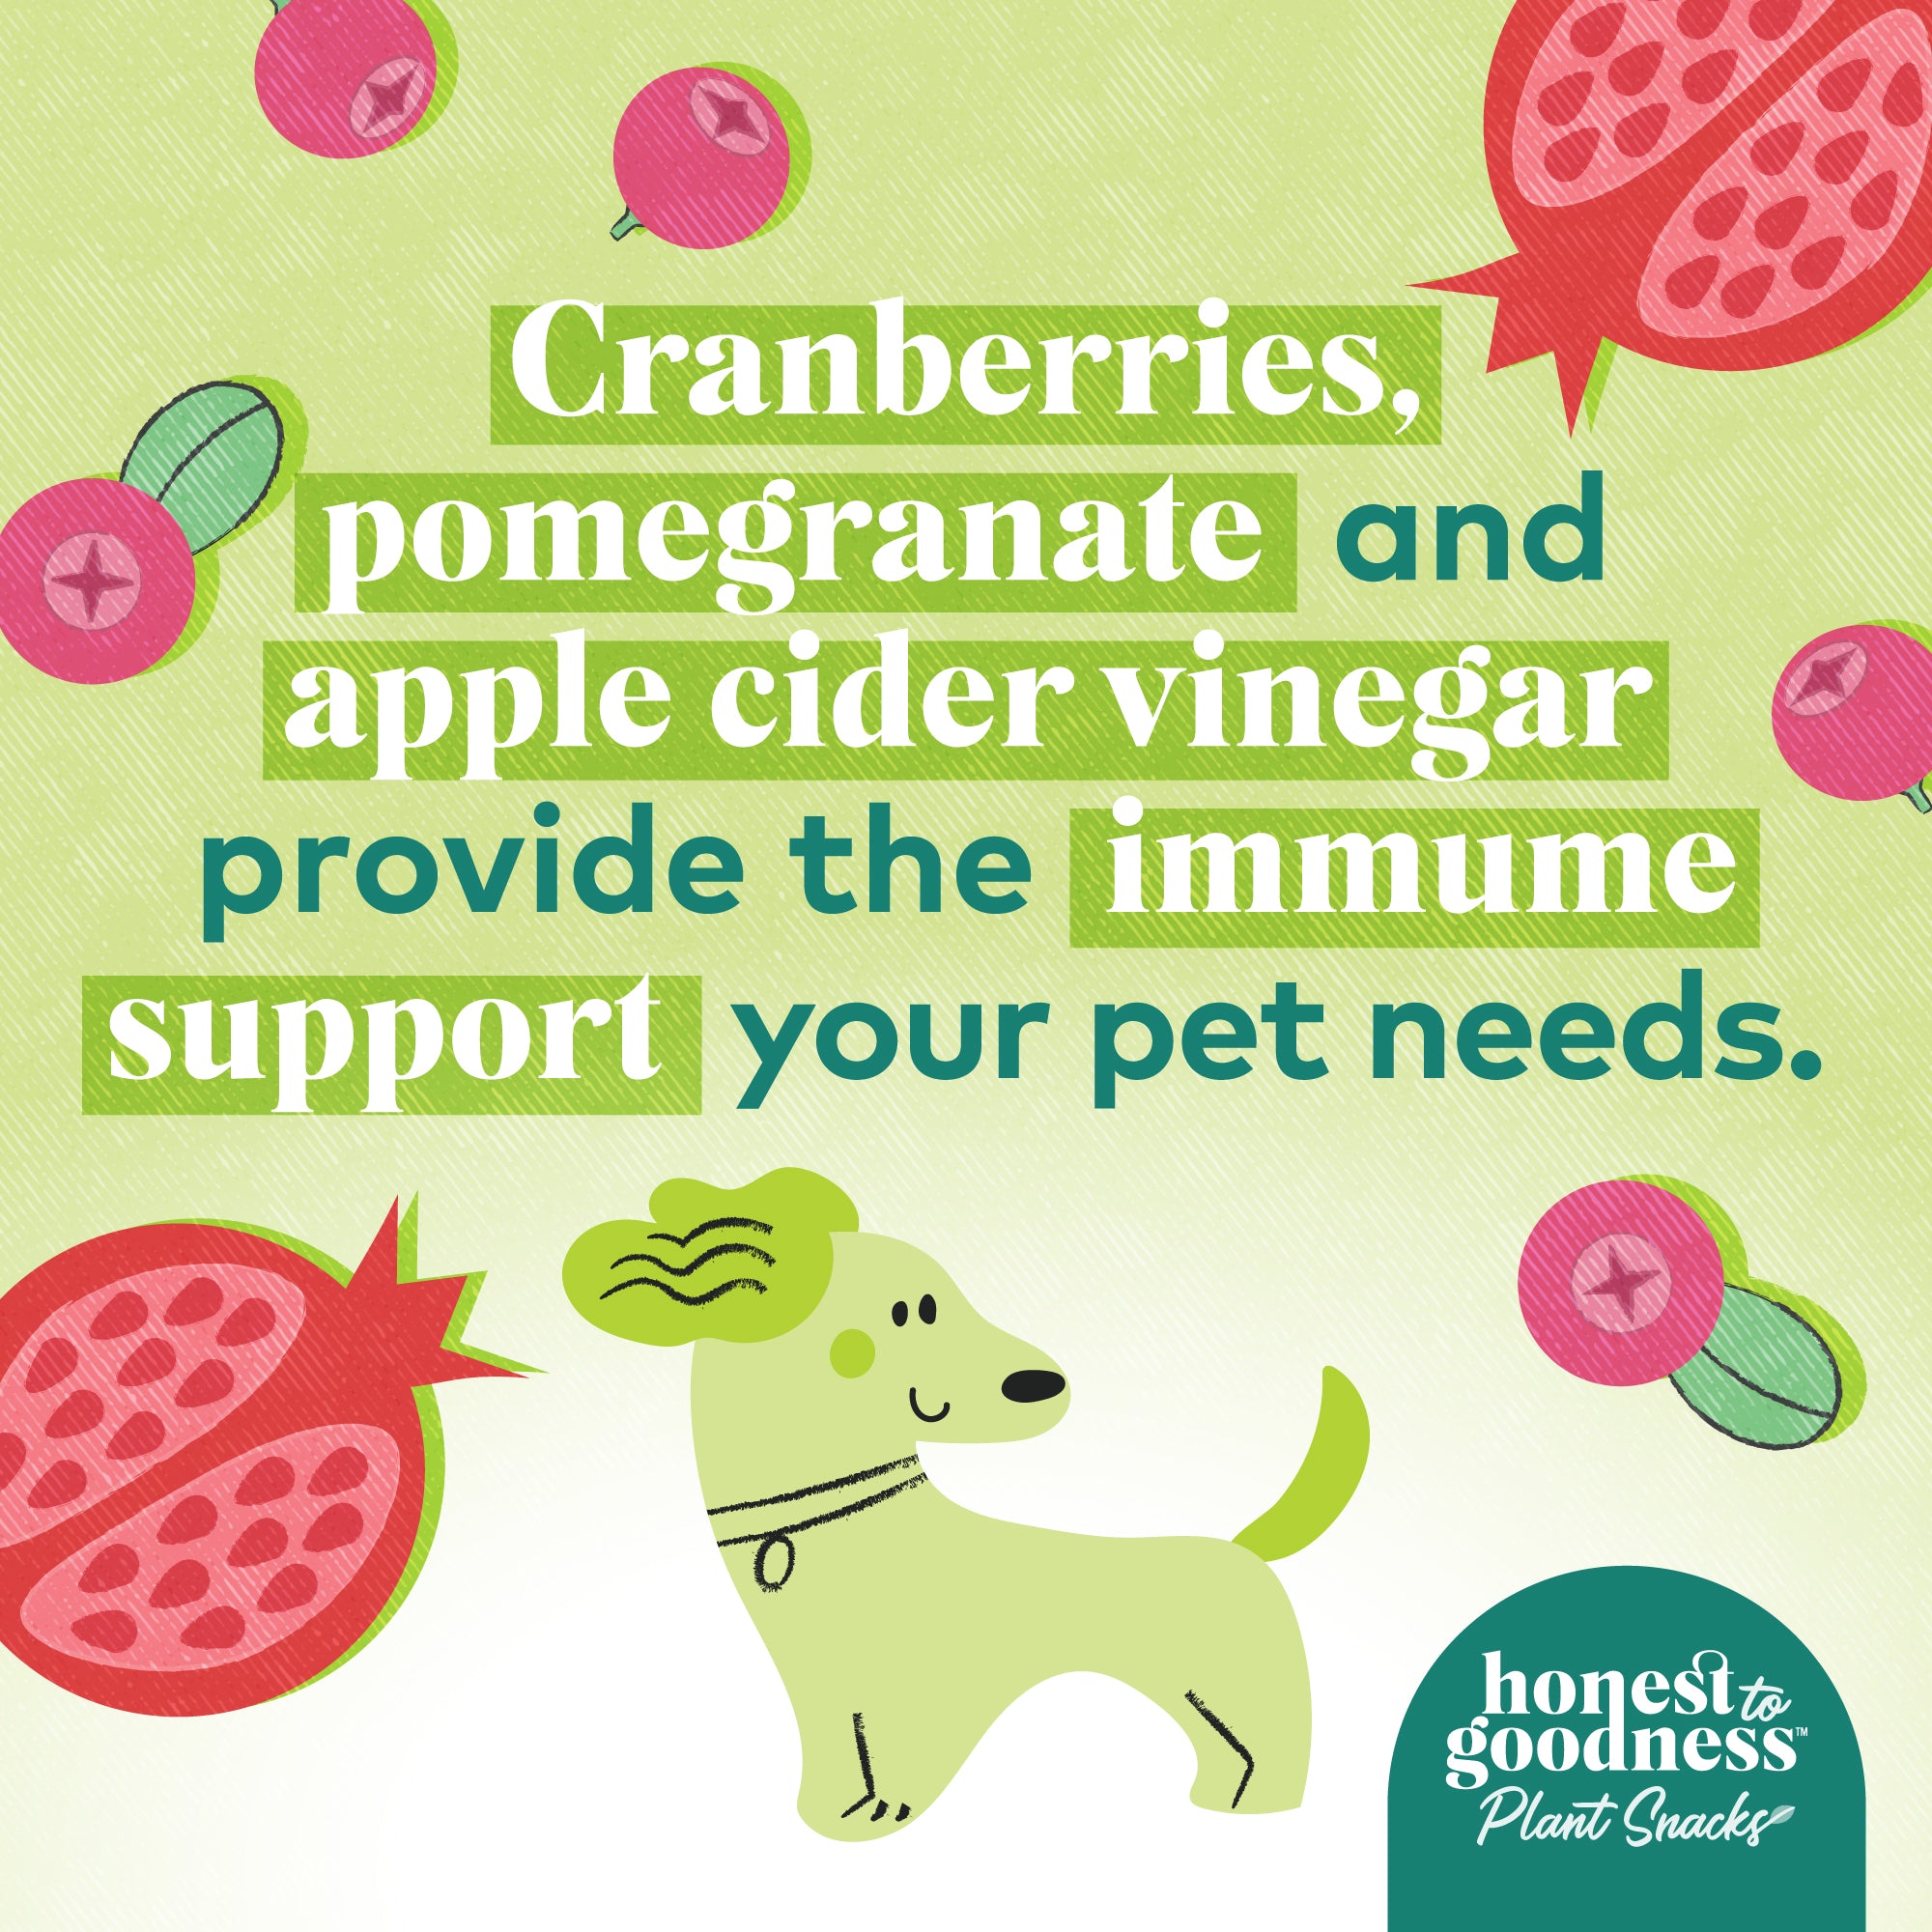 Cranberries, pomegranate and apple cider vinegar provide the immune support your pet needs.  Honest to Goodness plant snacks for dogs.